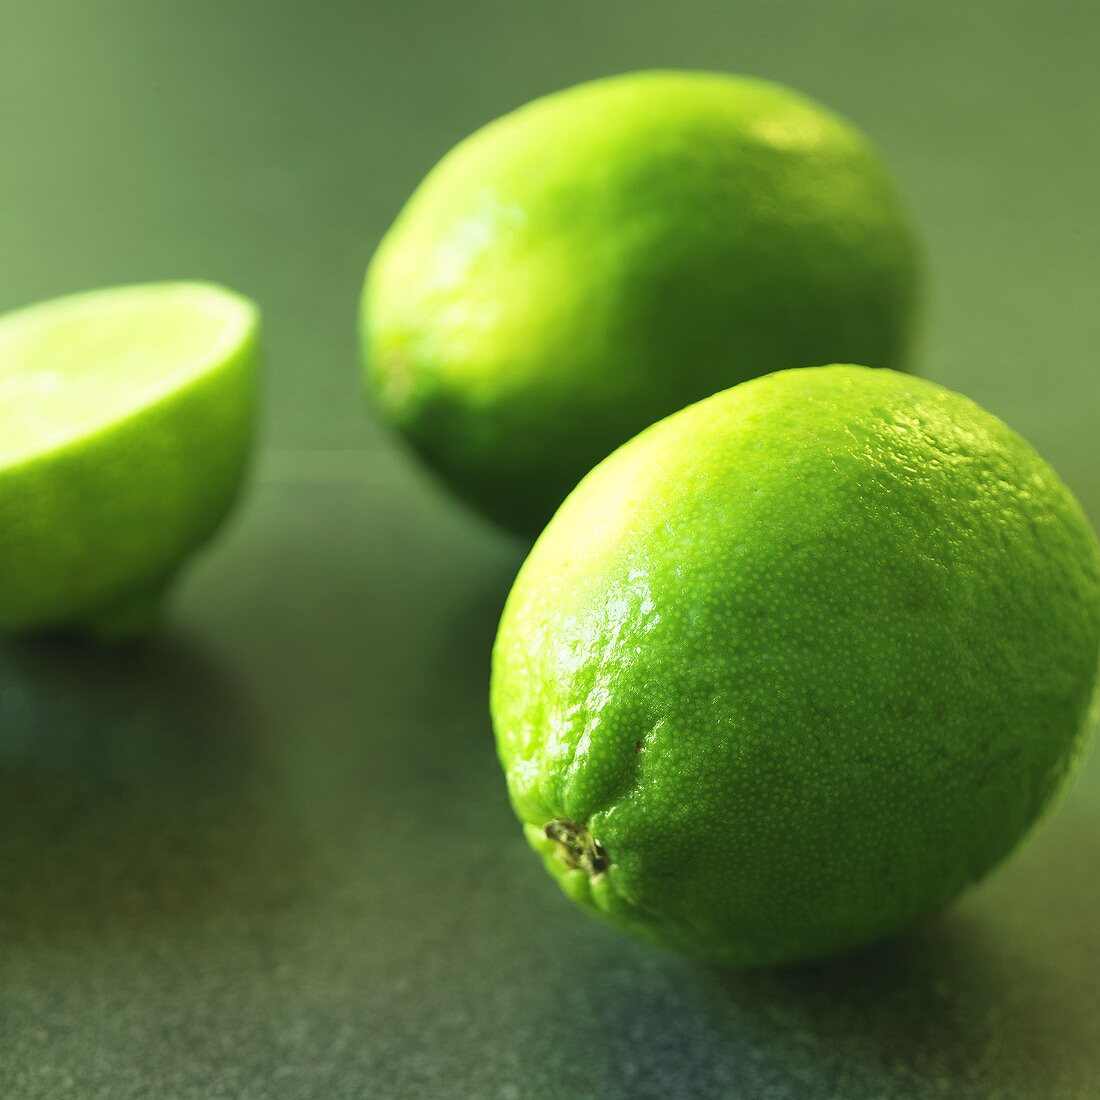 One half and two whole limes